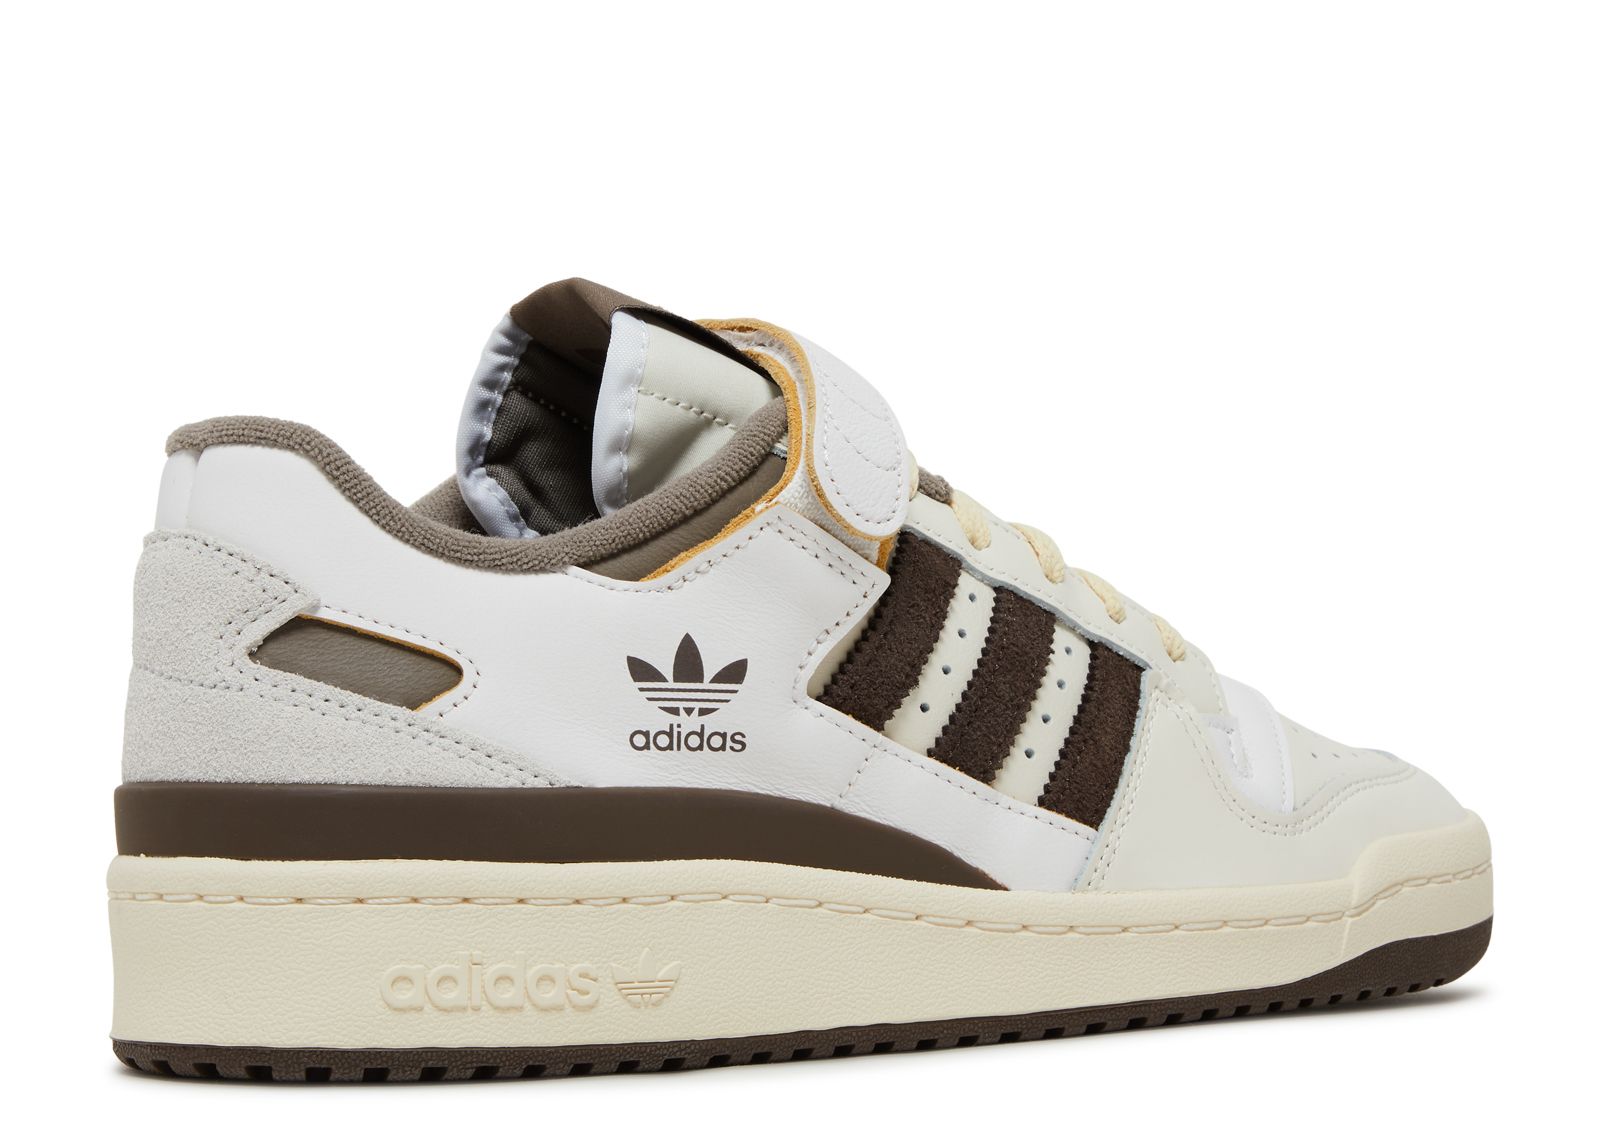 Forum low off. Adidas forum 84 Low off White. Кроссовки adidas forum 84 Low off White. Adidas forum 84 Low "off White Collegiate Gold Cream White". Adidas forum Cream White Brown.